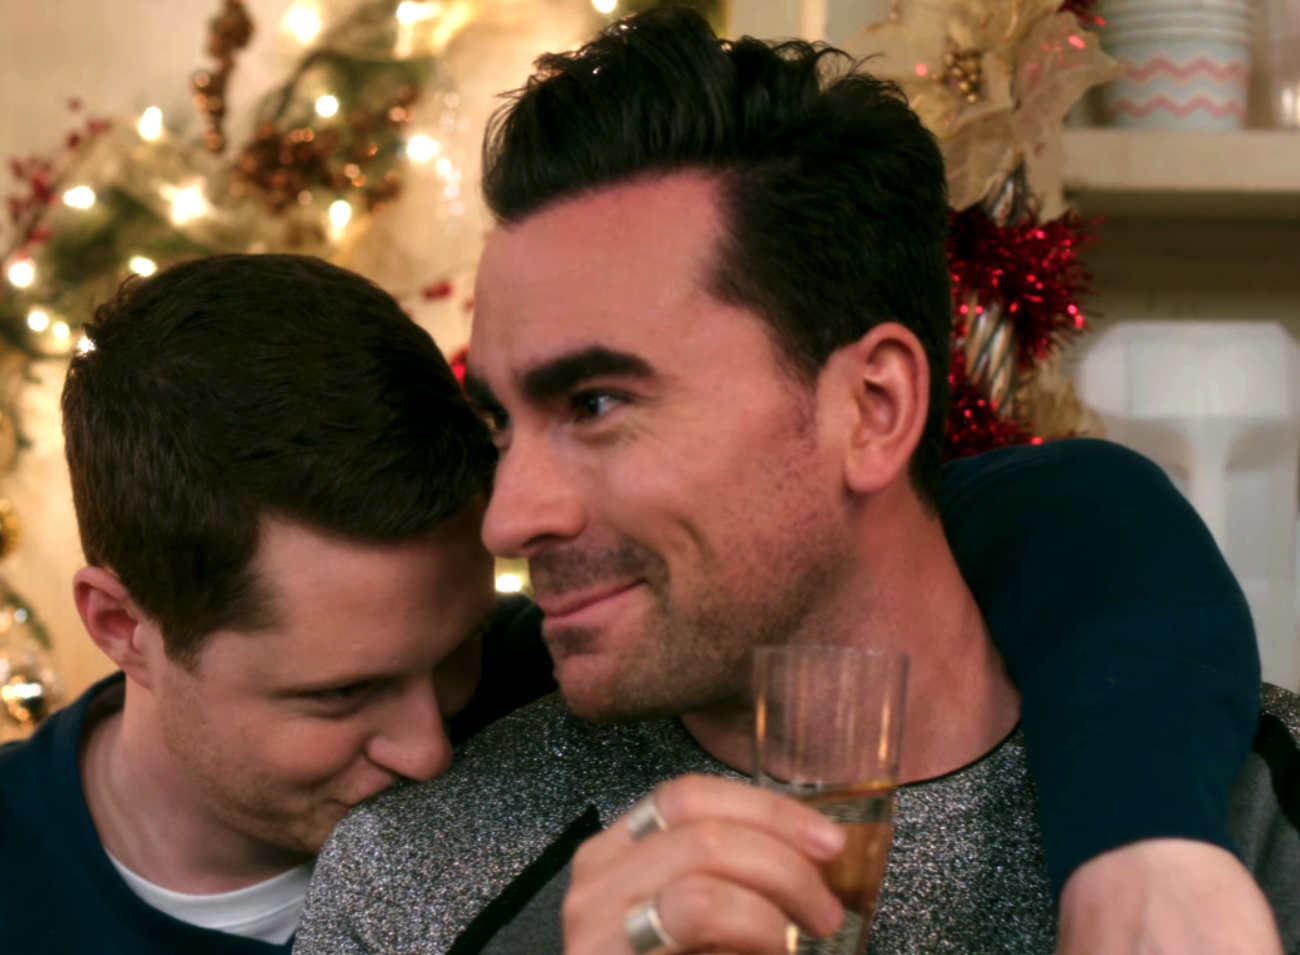 David holding a glass of wine and leaning towards Patrick who is giving him a kiss on his shoulder